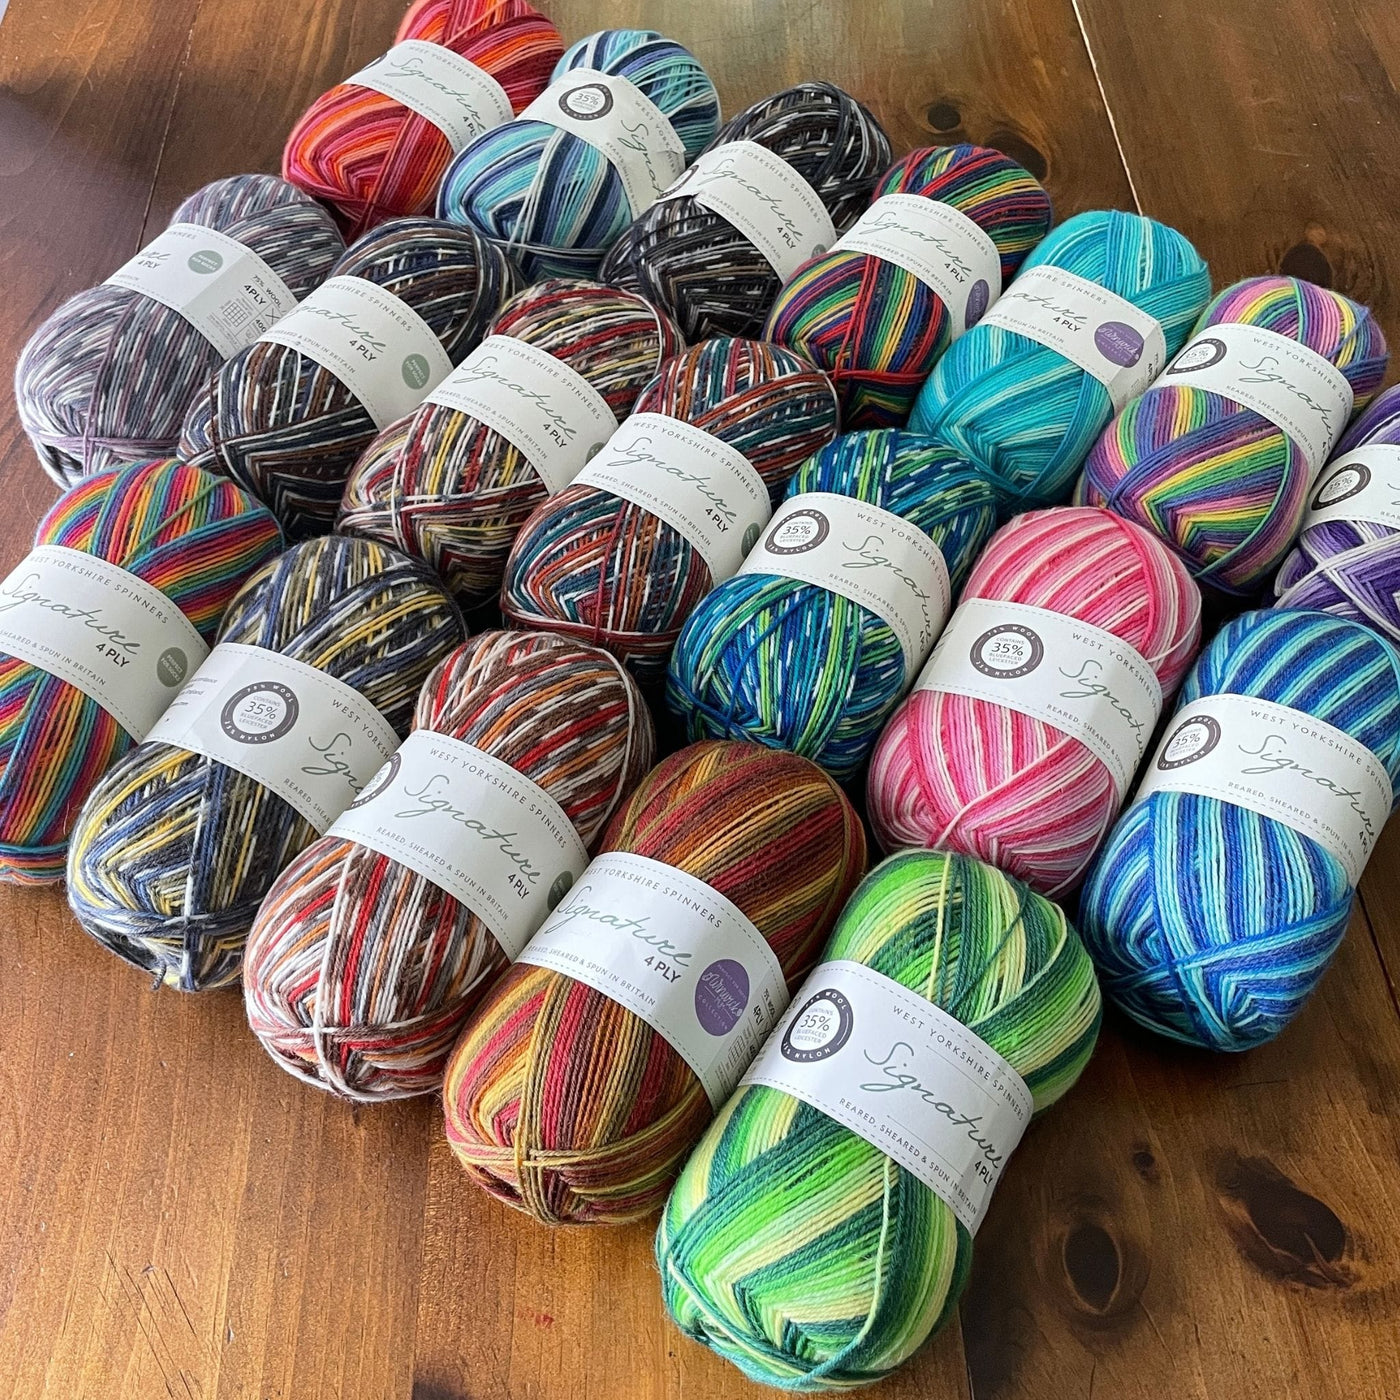 Three rows of West Yorkshire Spinners Signature 4ply yarn, fingering weight, in 100 gram balls, in striped or multicolored colorways, on a wooden table. 